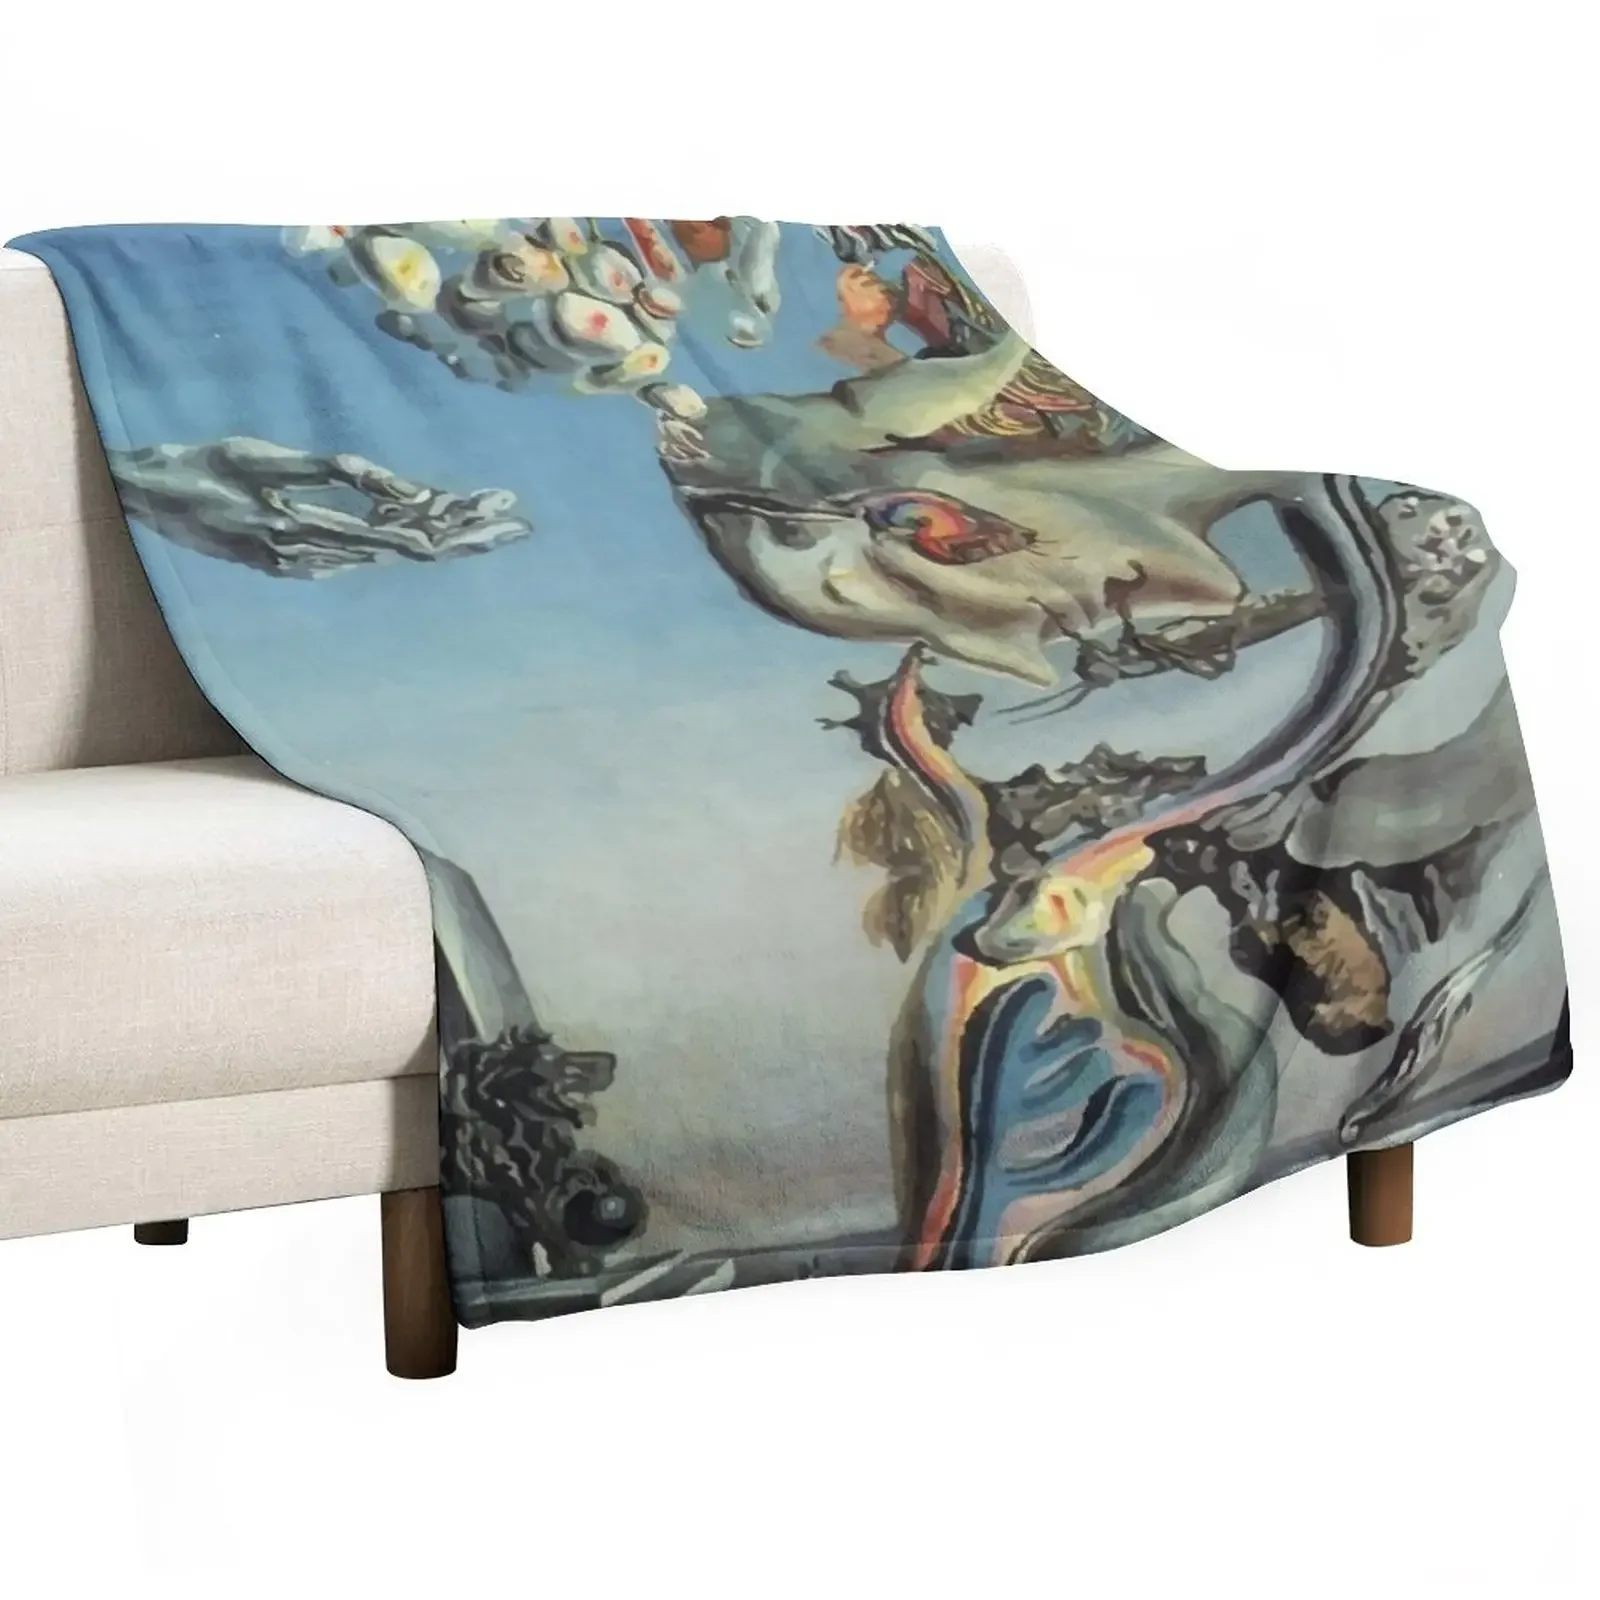 

Salvador Dali | Playing in the Dark Throw Blanket Sofas Blankets For Sofas Sofa Luxury Brand Blankets